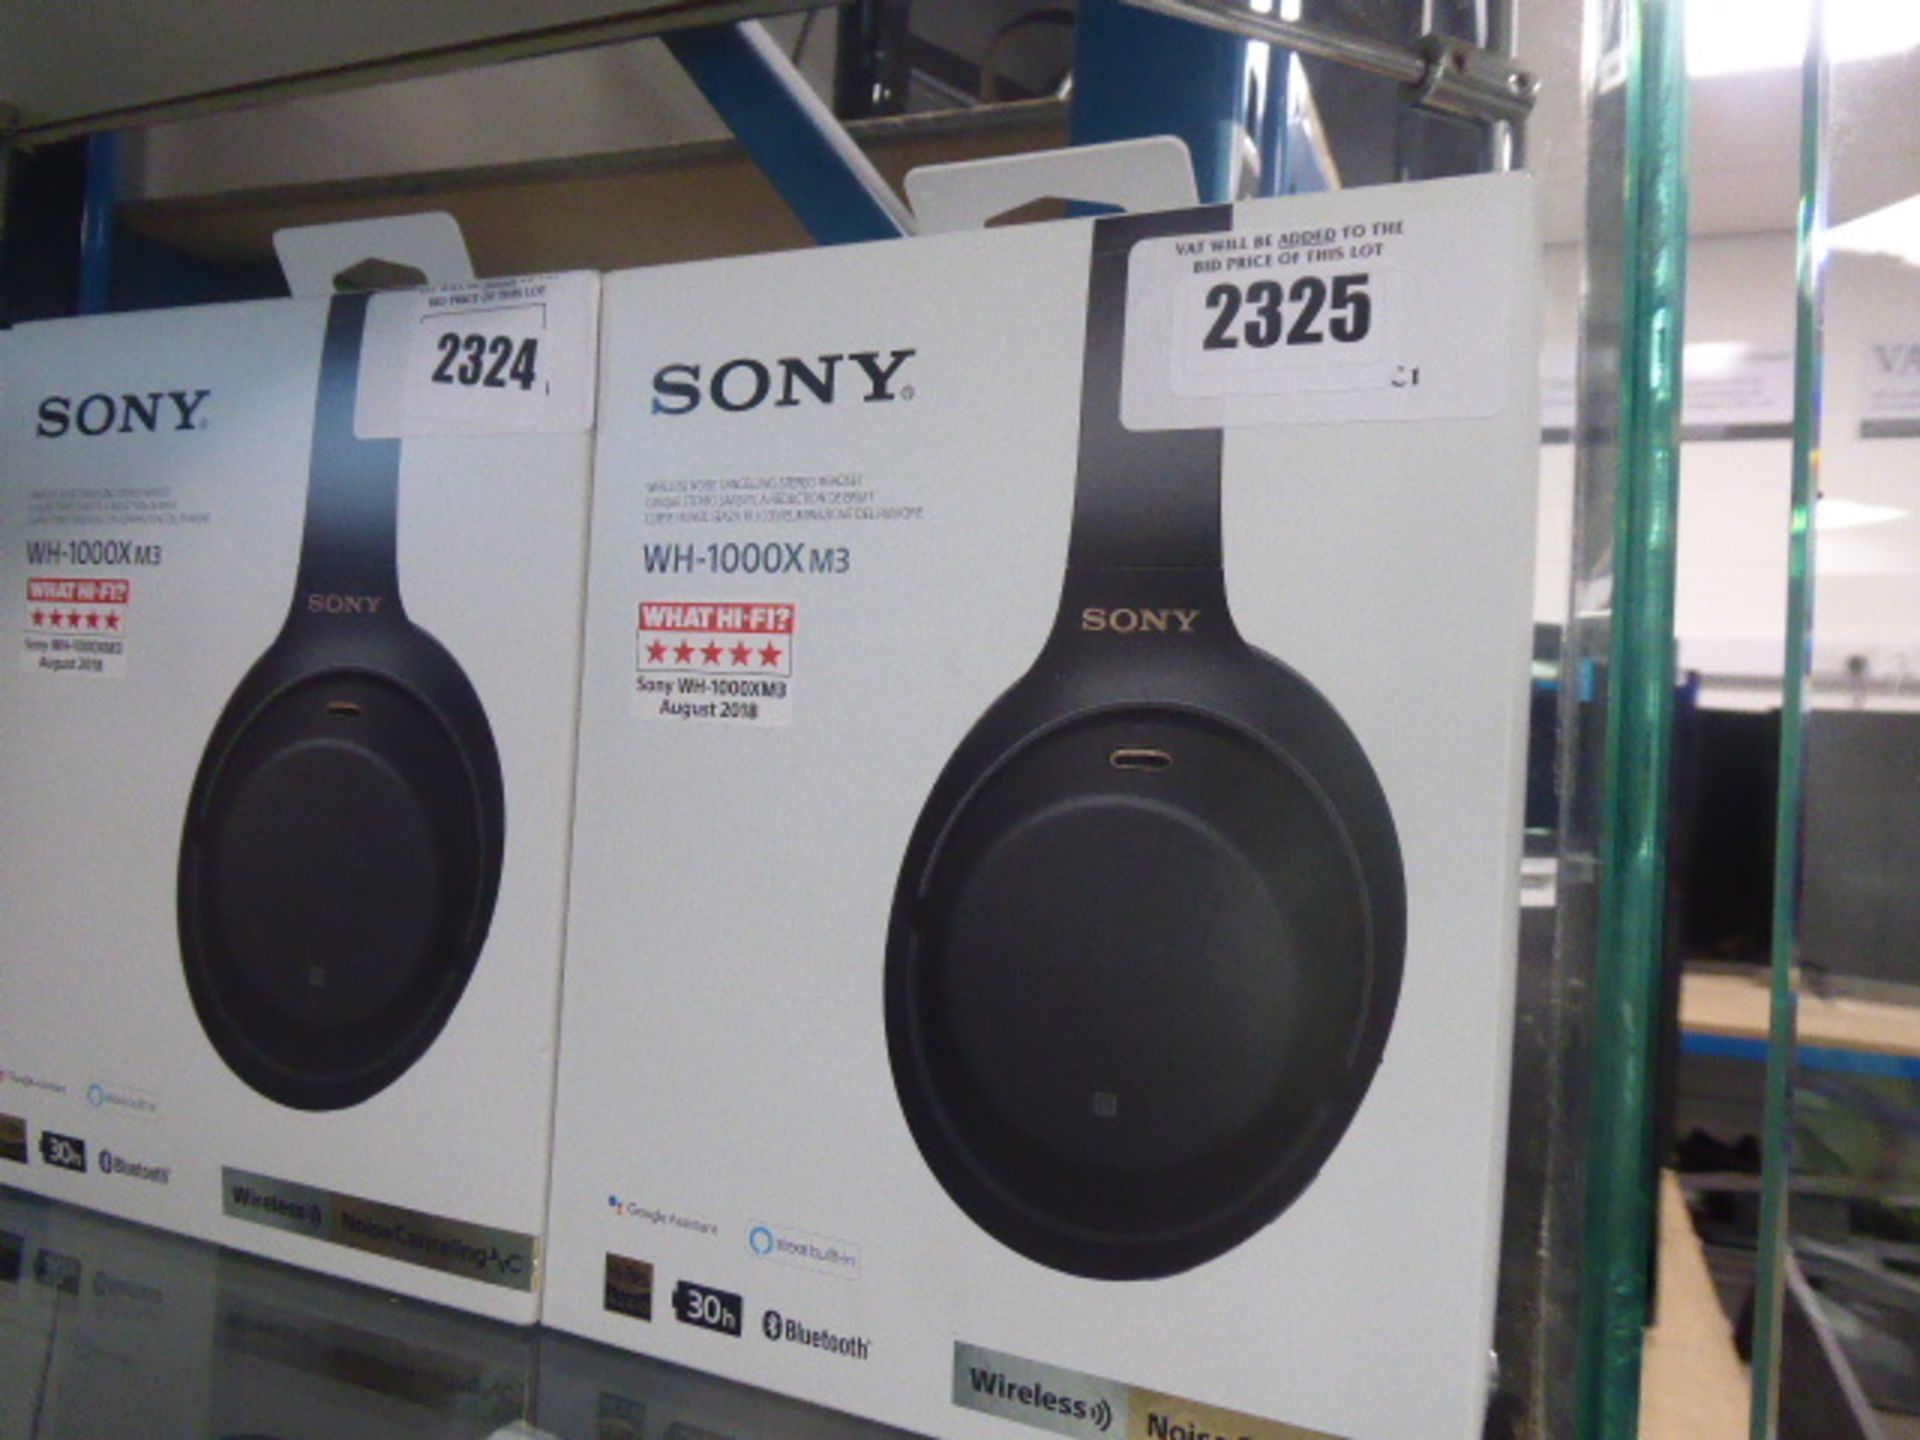 Sony WH-1000XM3 wireless noise cancelling headphones with box